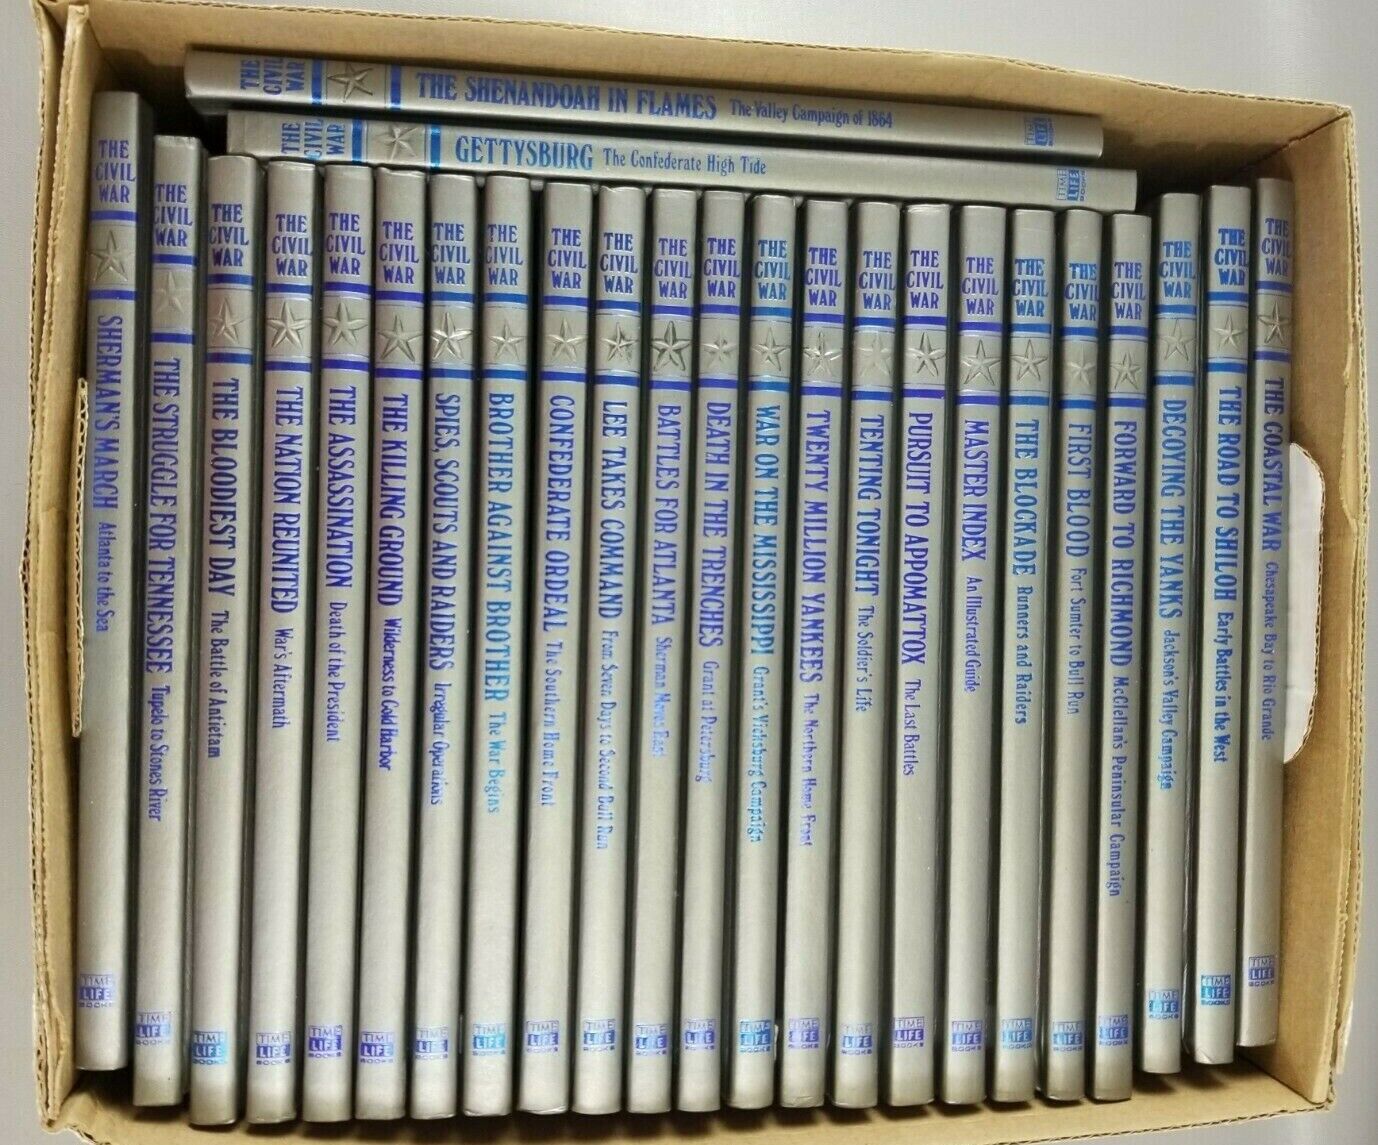 The Civil War Time Life Collection of 25 Books